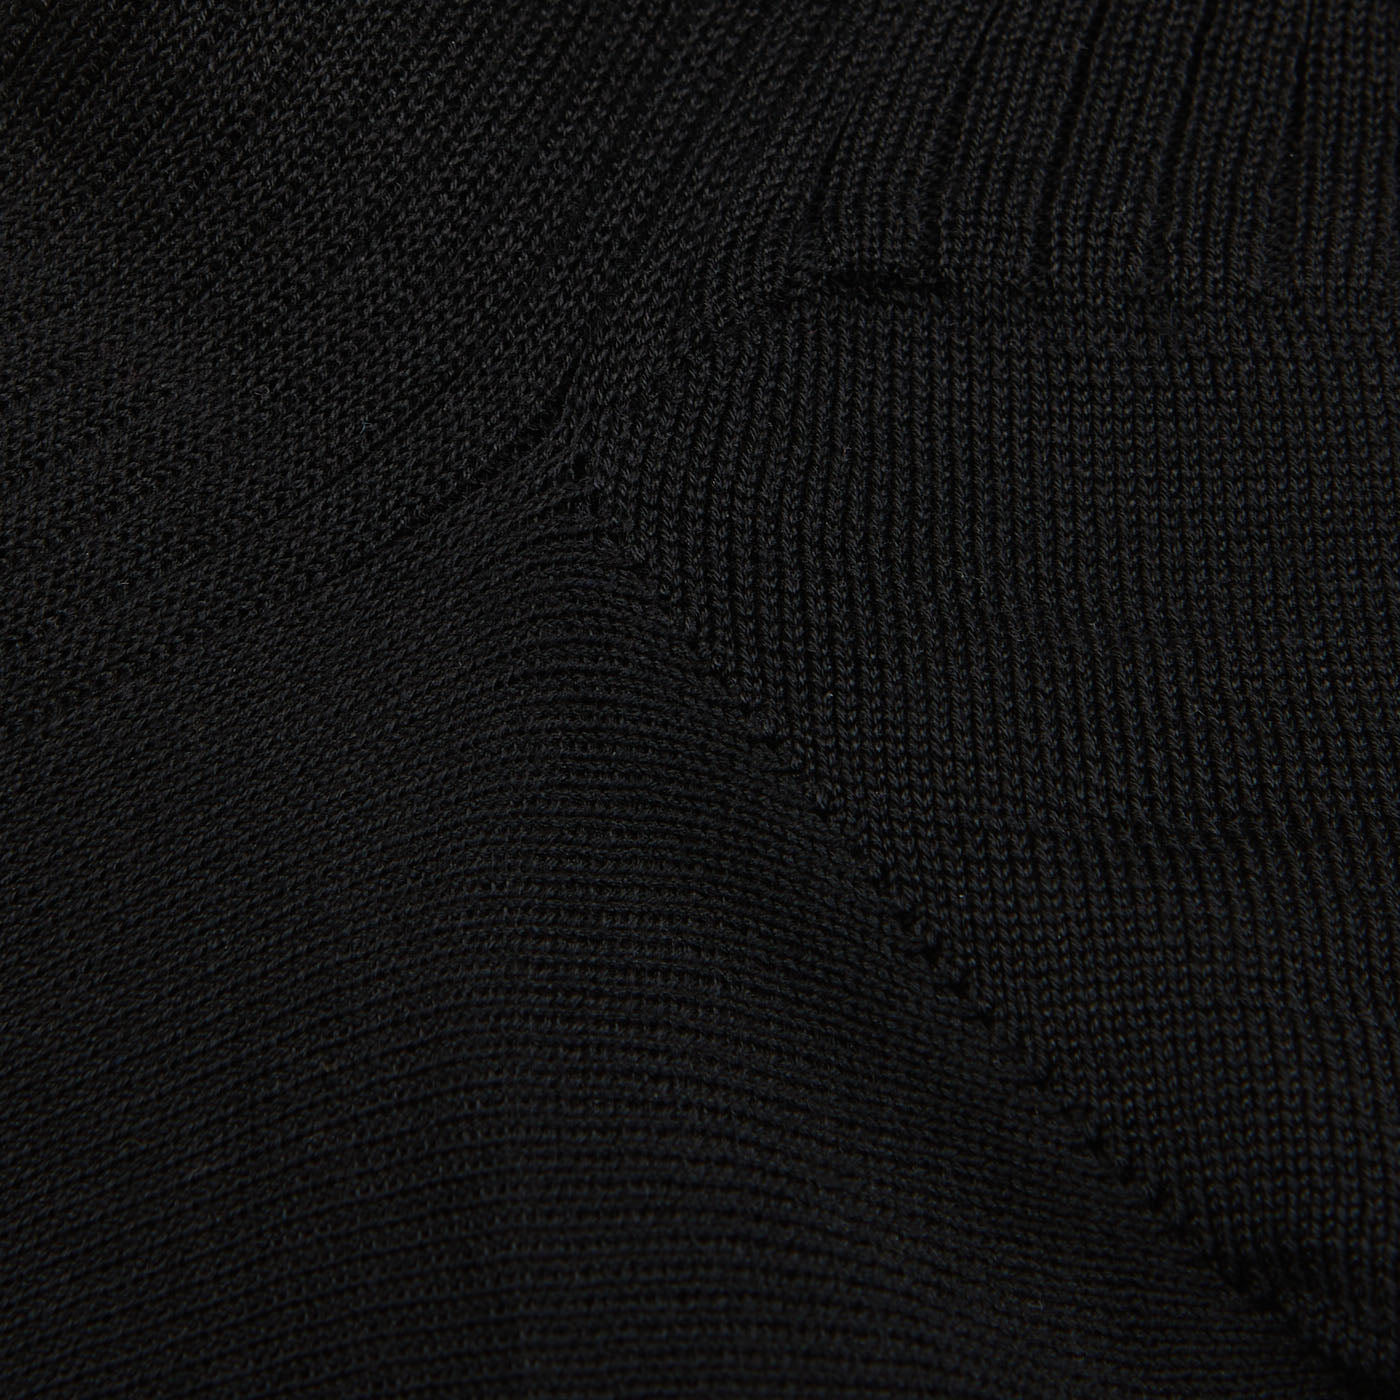 Close-up view of a black Doré Doré Cotton Fil d'Ècosse Ribbed Socks, showing detailed weave pattern with varying textures and stitch styles.